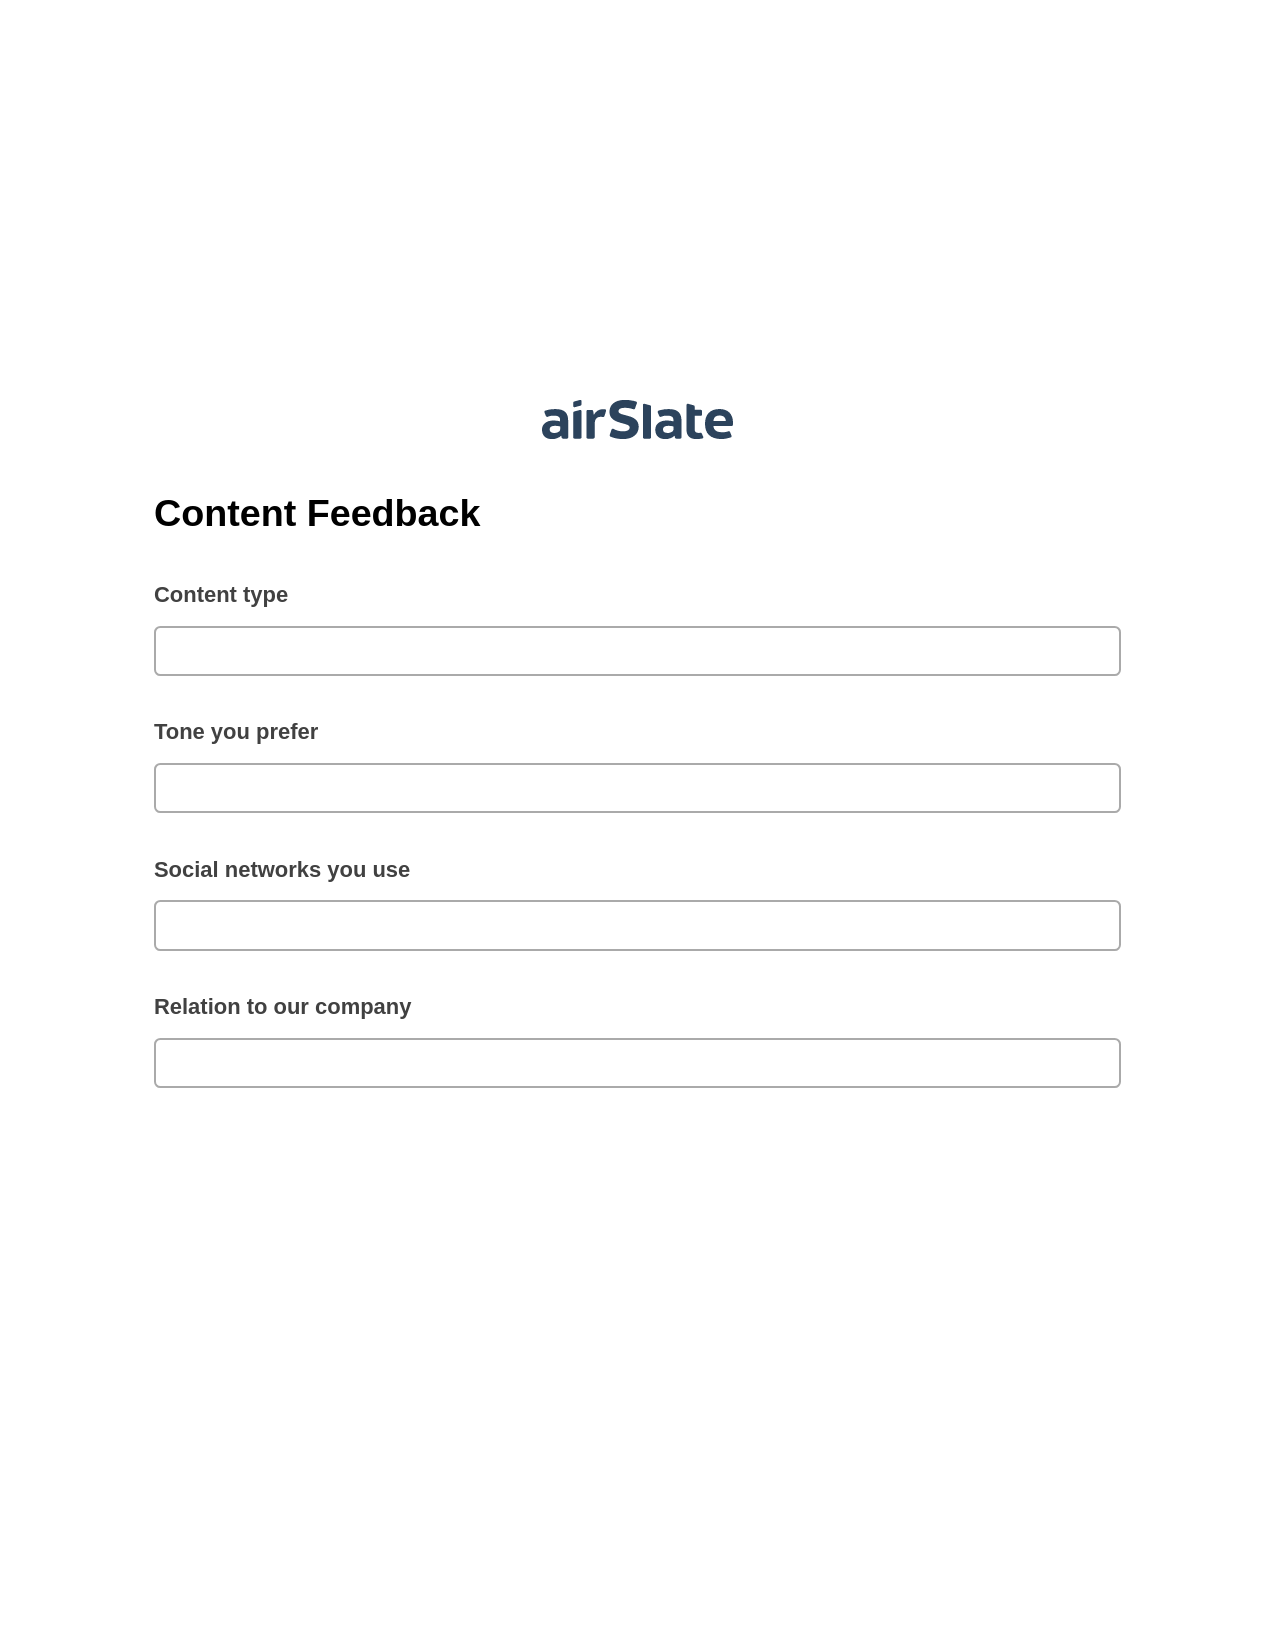 Content Feedback Pre-fill from CSV File Bot, Roles Reminder Bot, Post-finish Document Bot